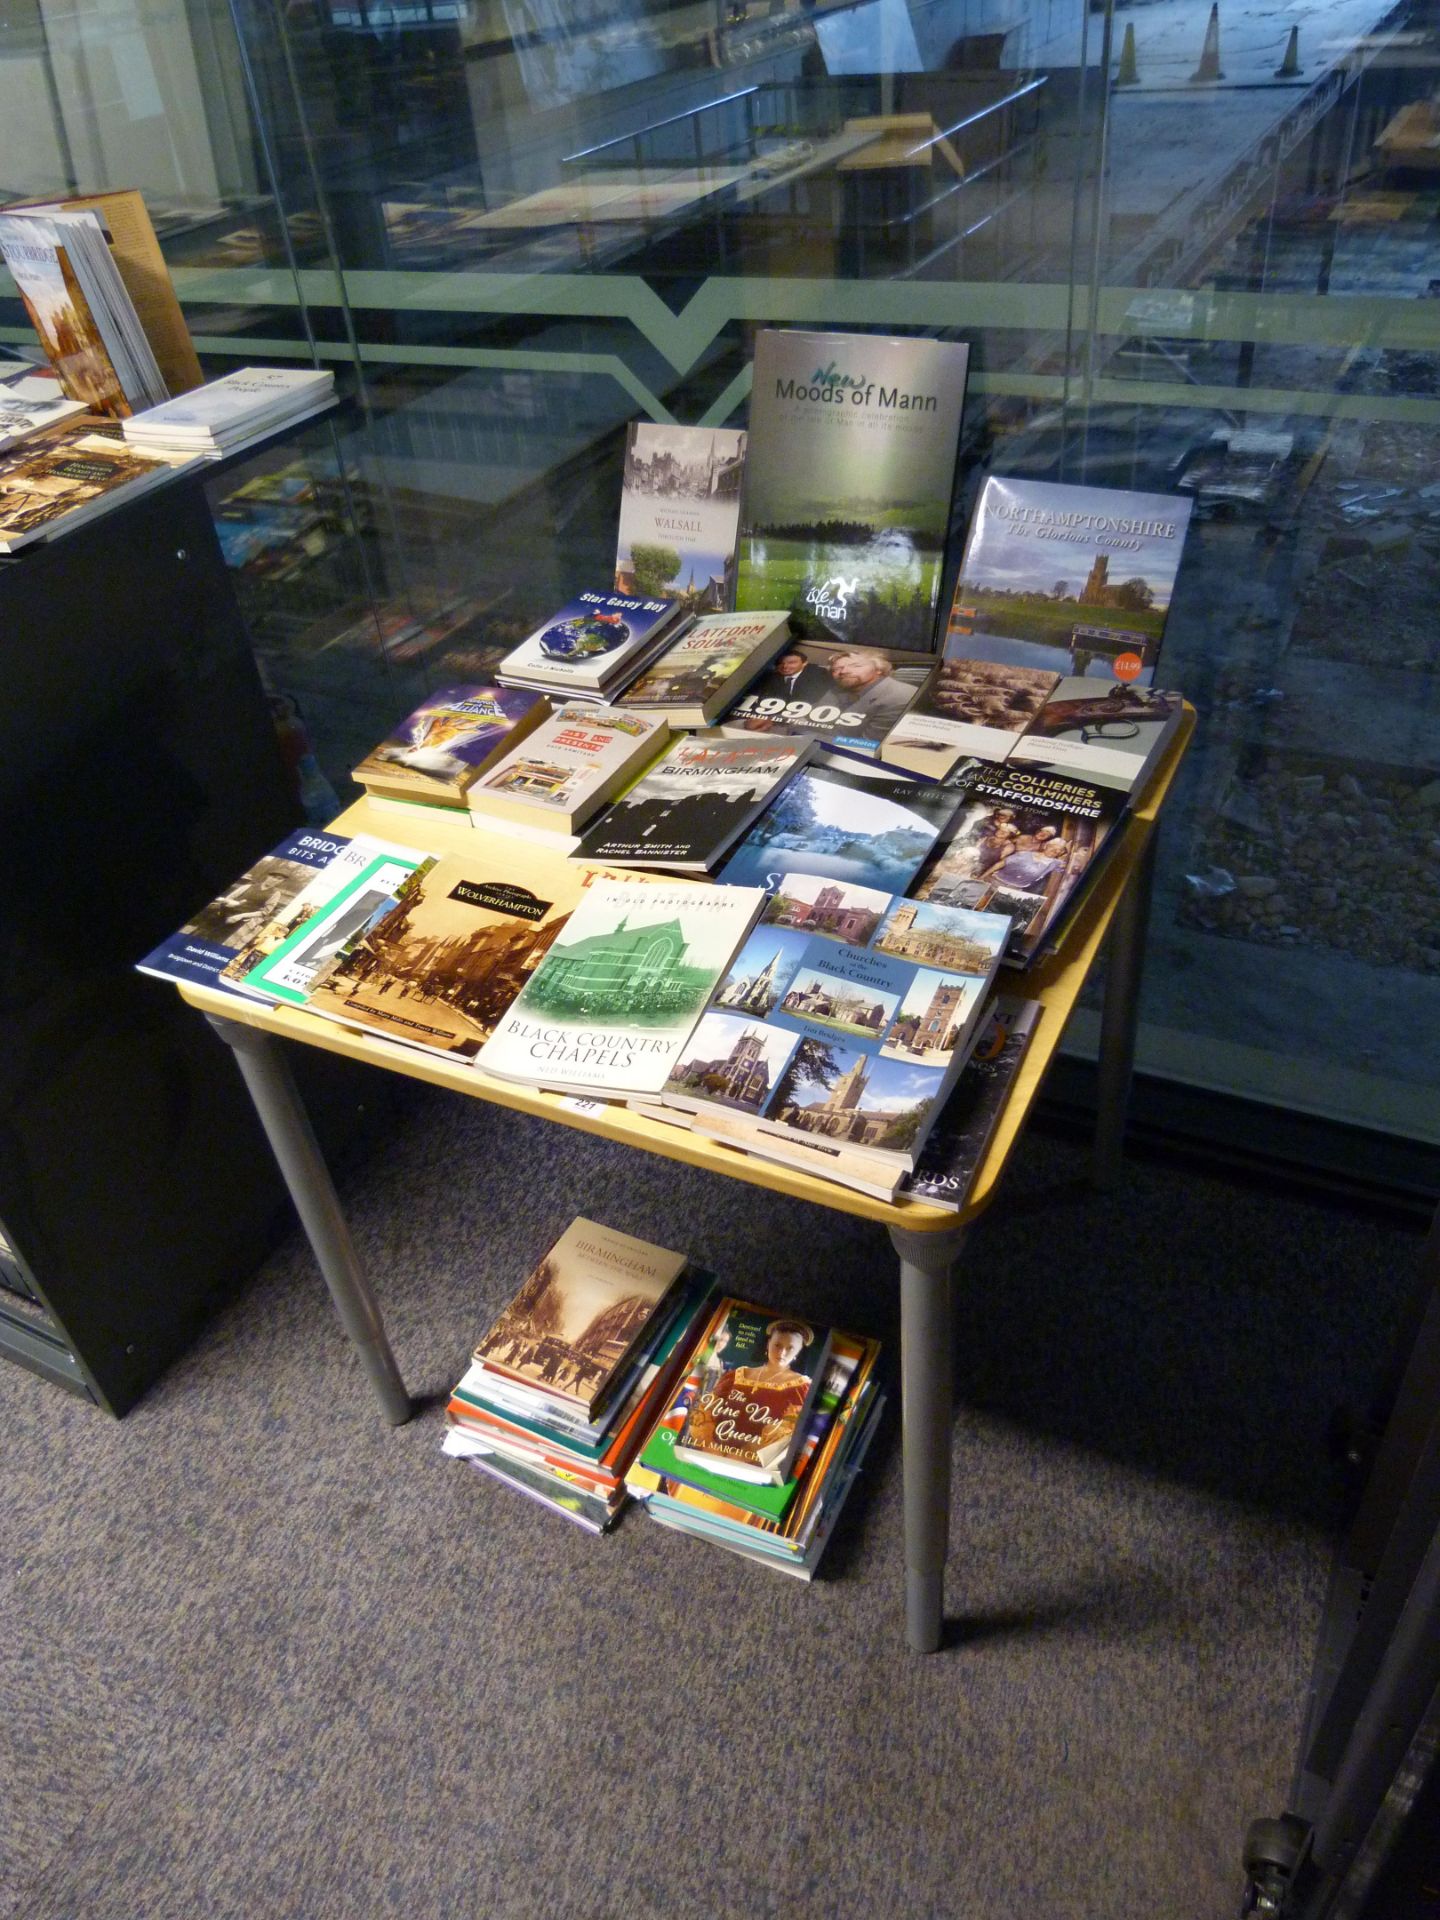 Local interest - a collection of books including books relating to the Midlands through time.